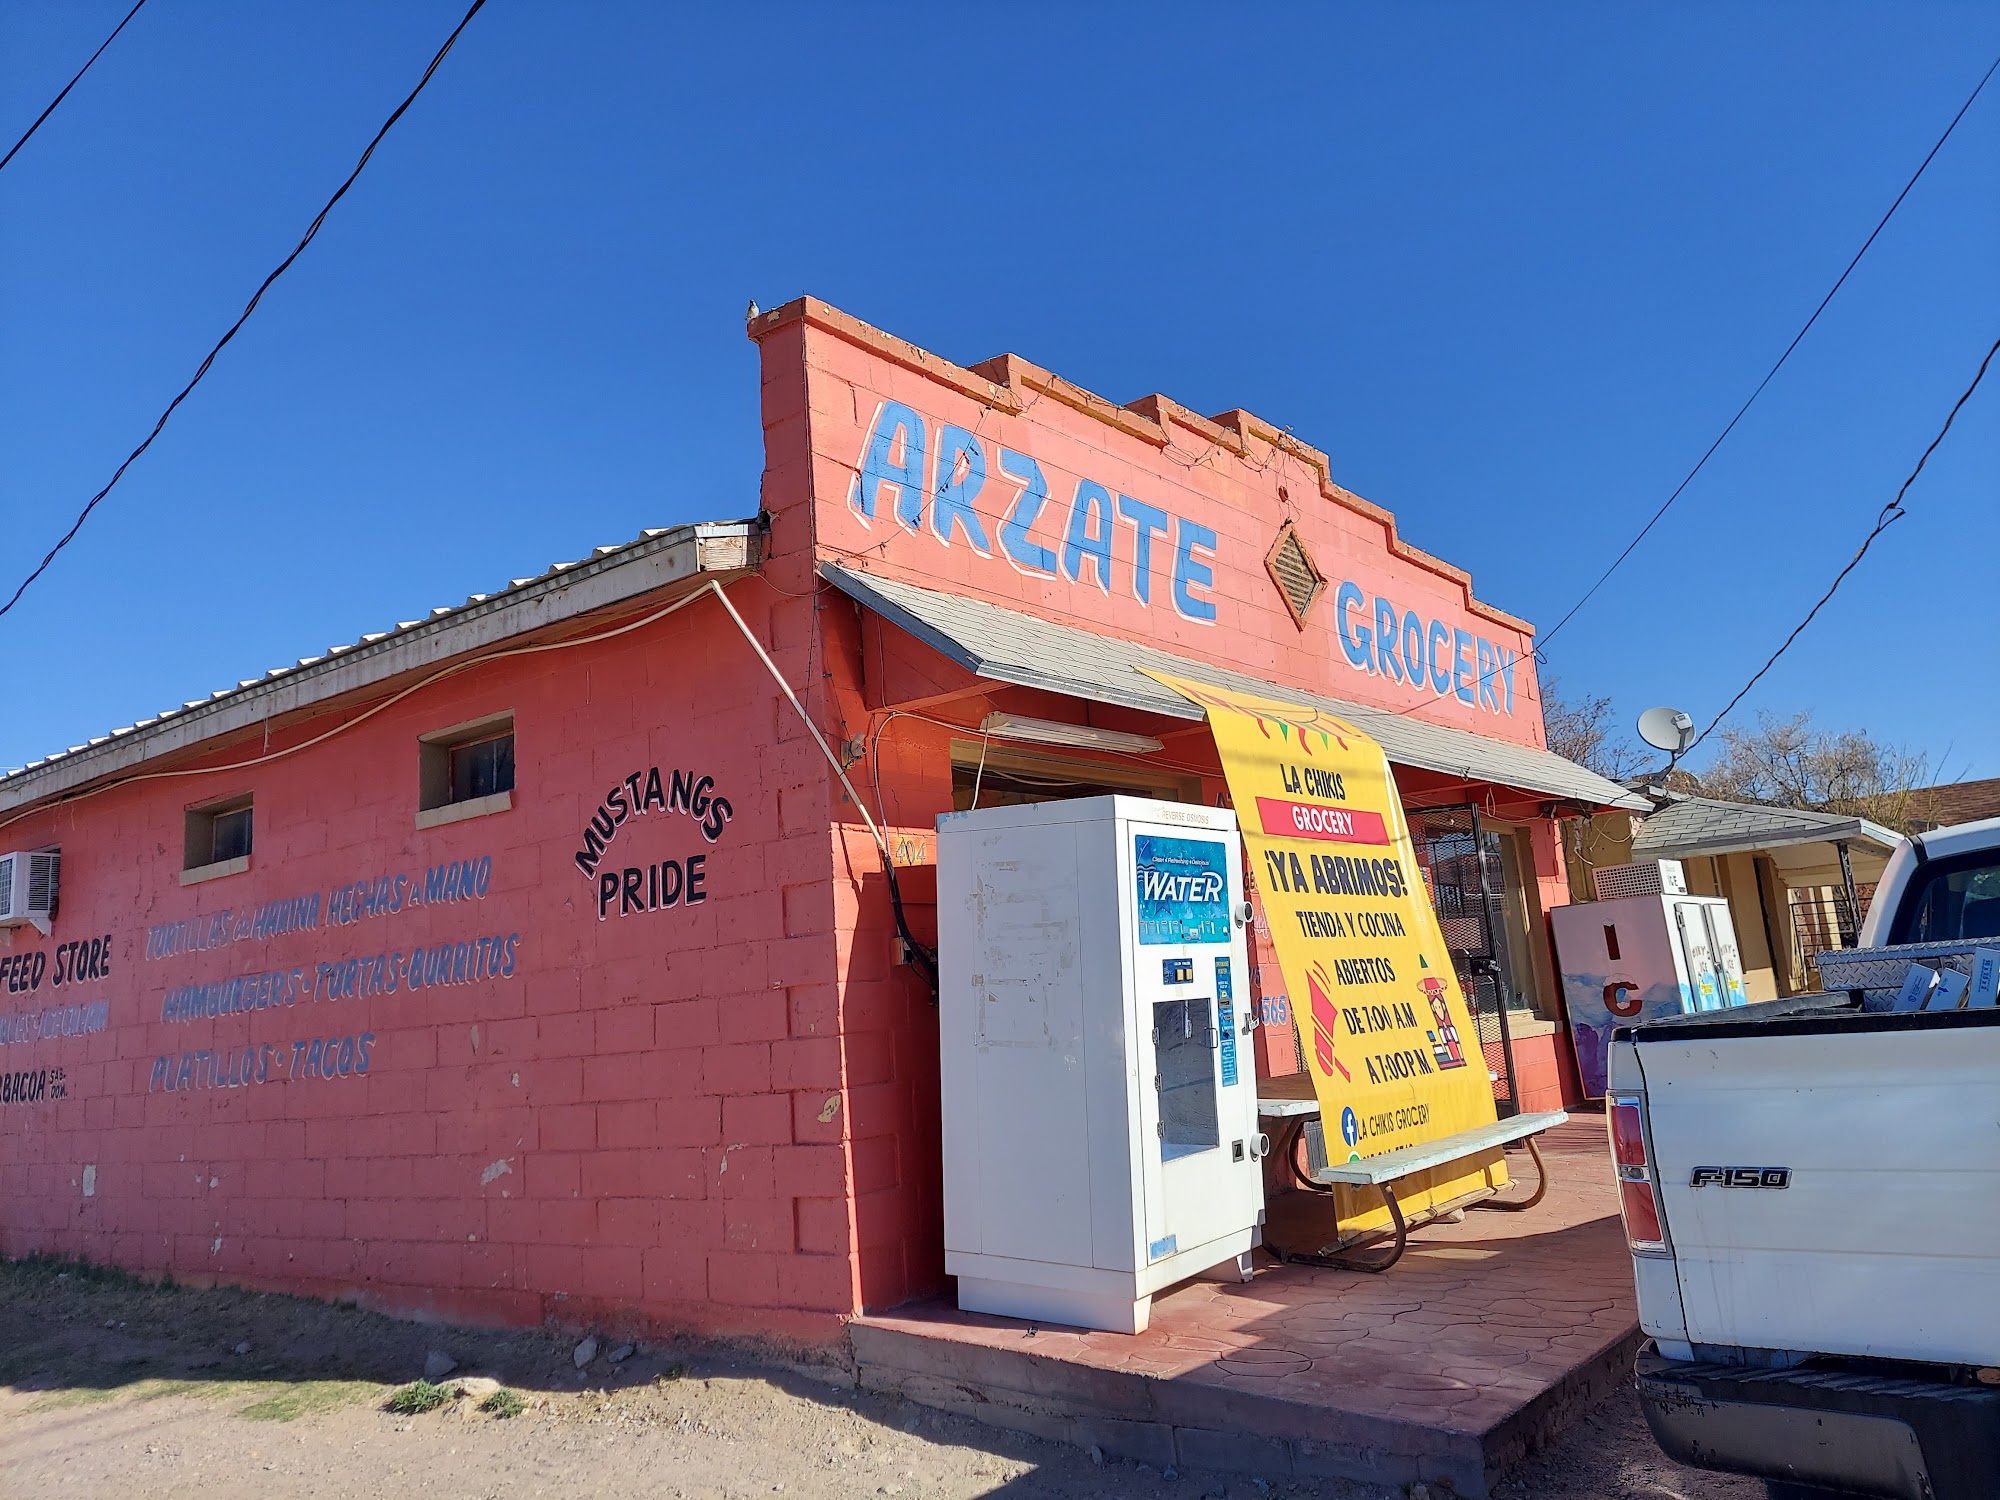 Arzate Grocery